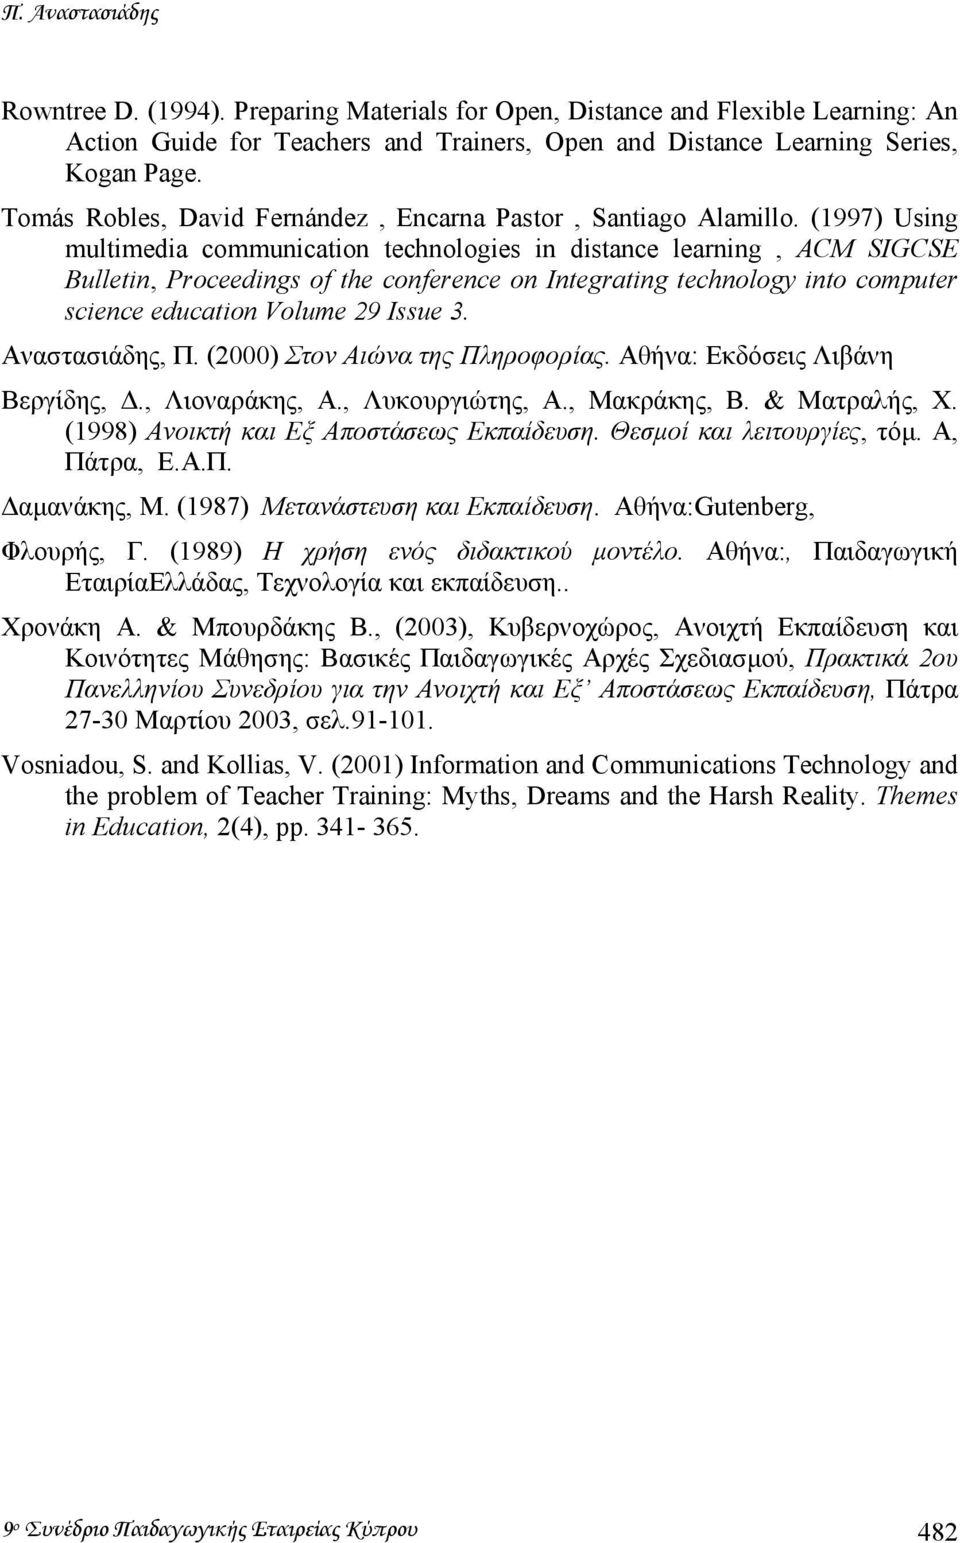 (1997) Using multimedia communication technologies in distance learning, ACM SIGCSE Bulletin, Proceedings of the conference on Integrating technology into computer science education Volume 29 Issue 3.